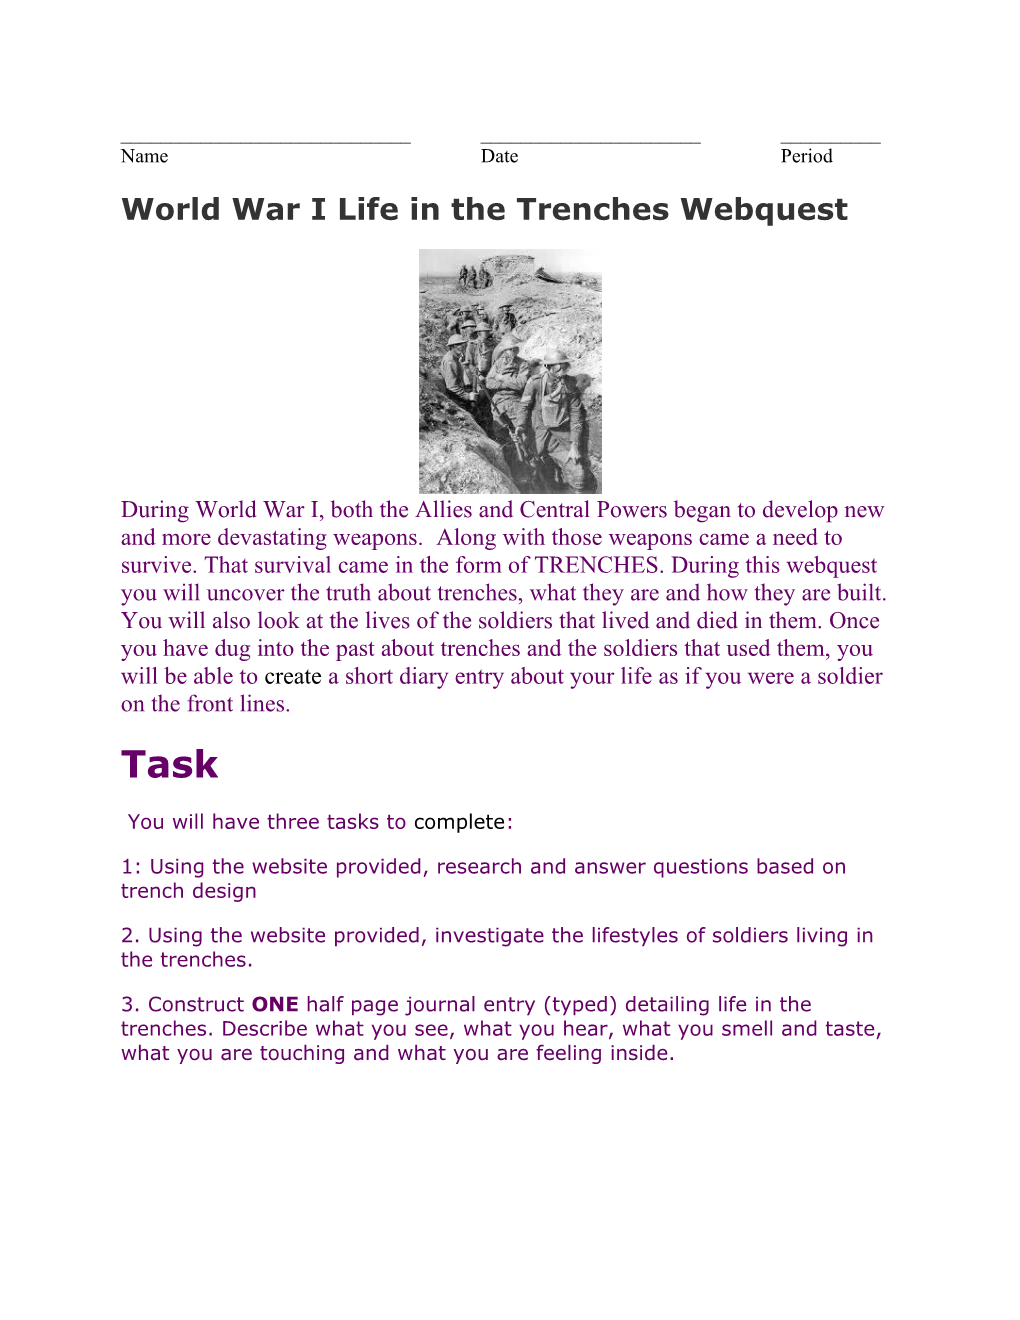 World War I Life in the Trenches Webquest